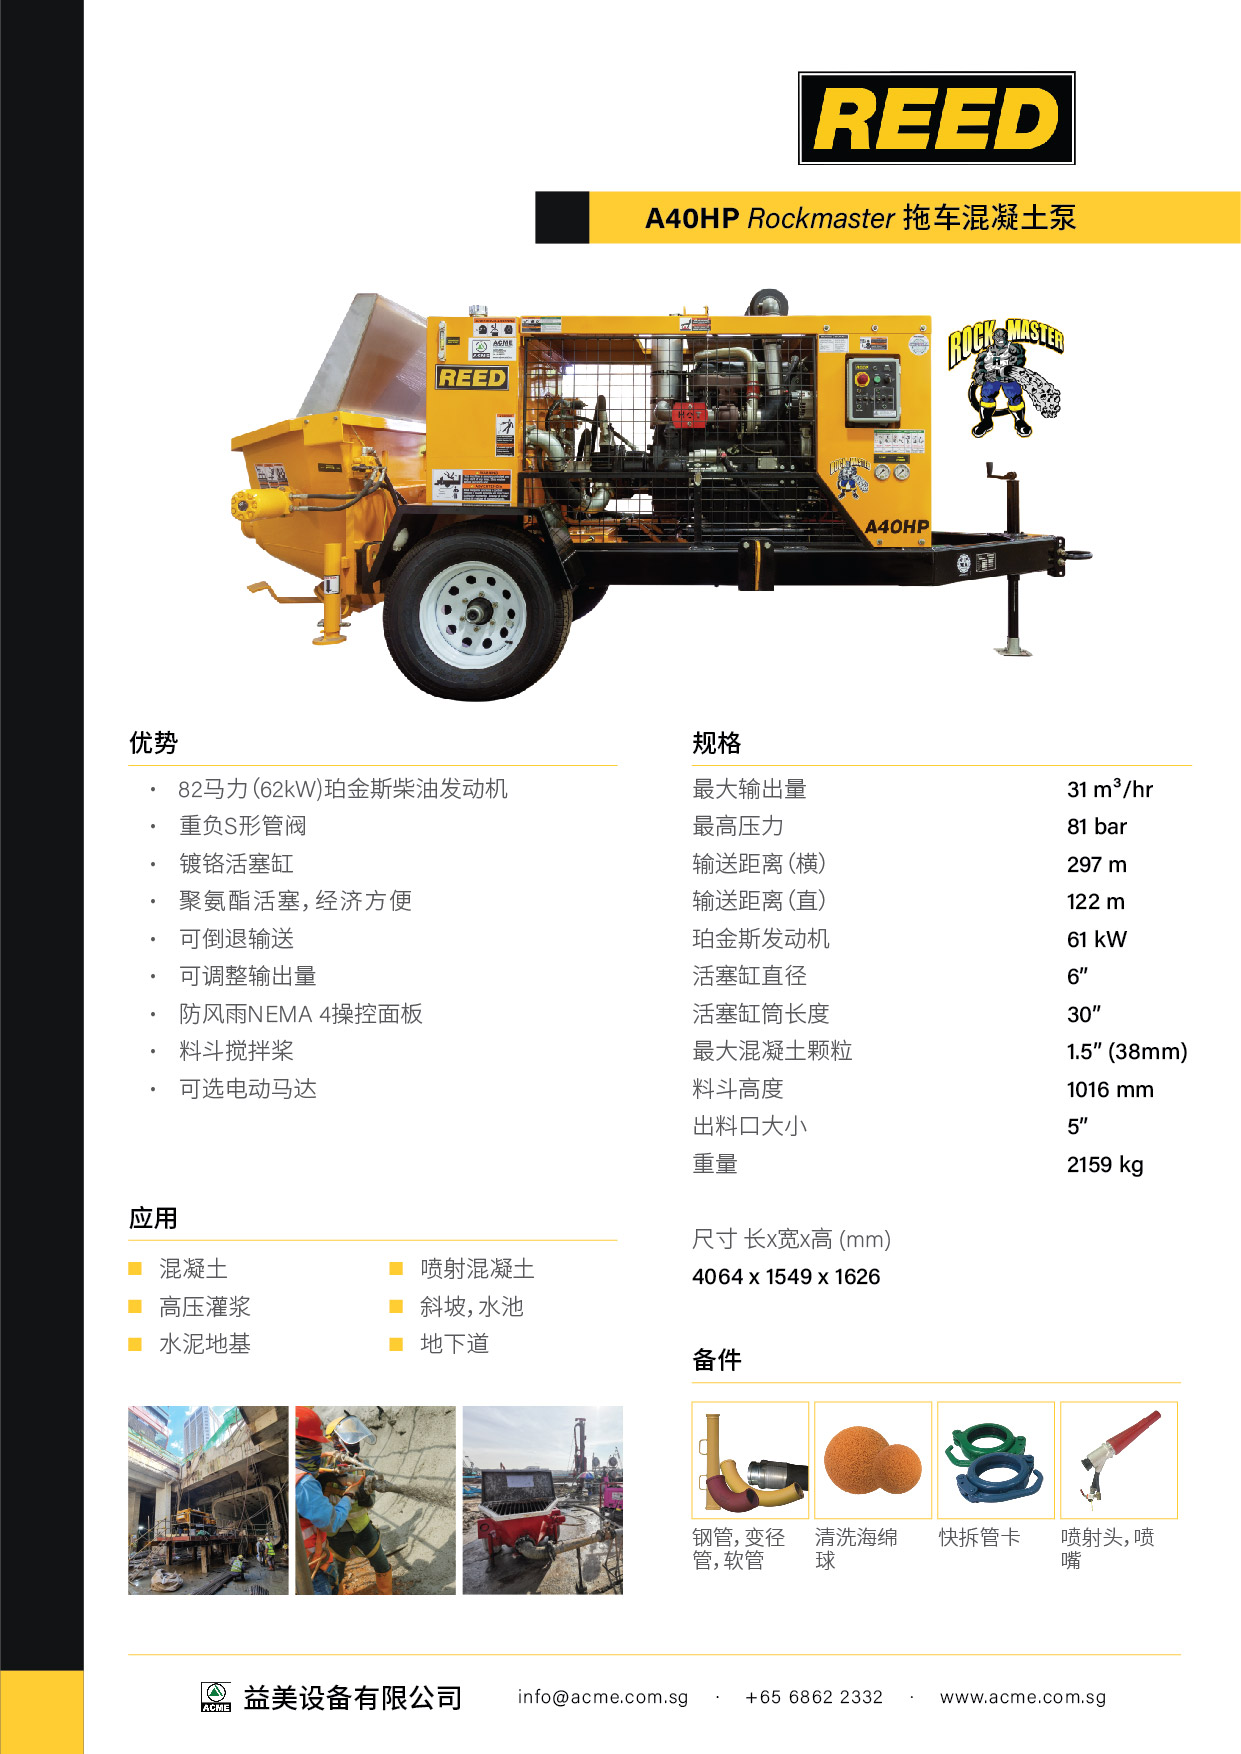 REED A40HP Chinese Brochure